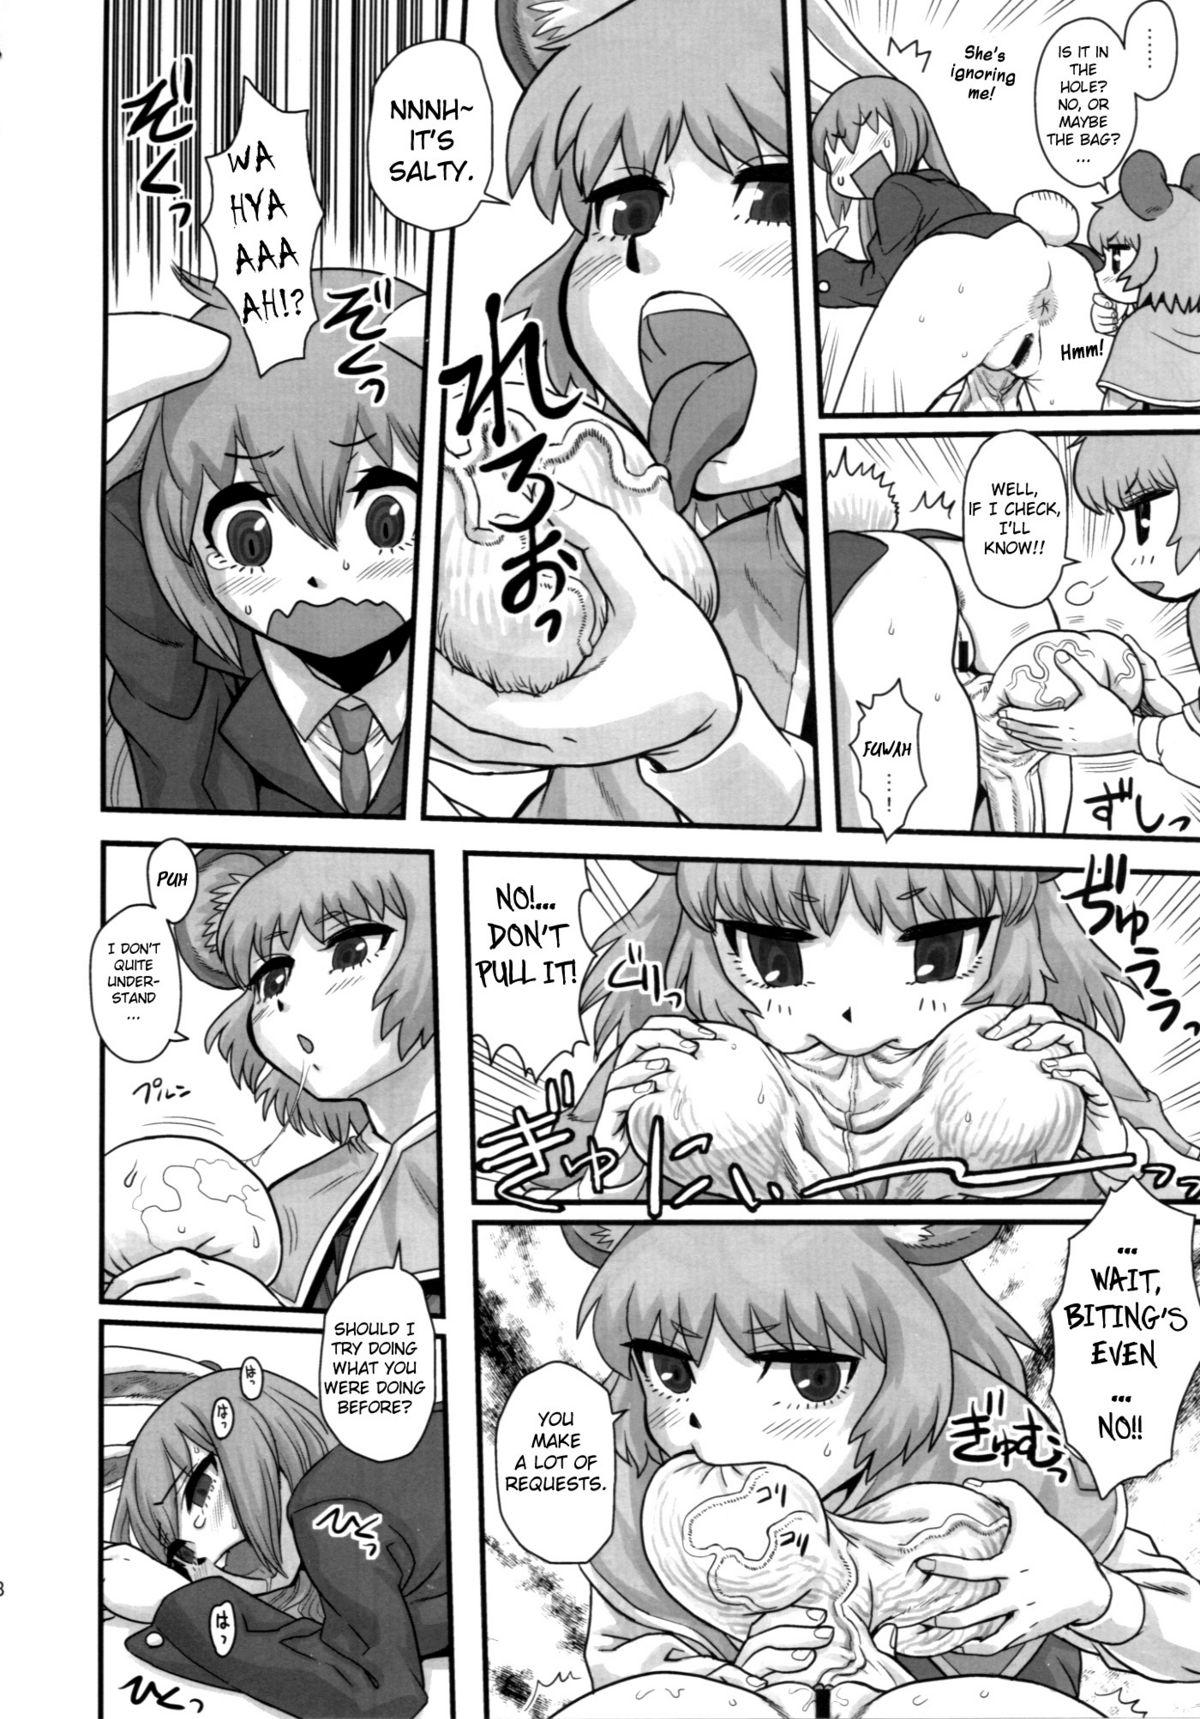 Linda Lunatic Udon - Touhou project Girlfriends - Page 7